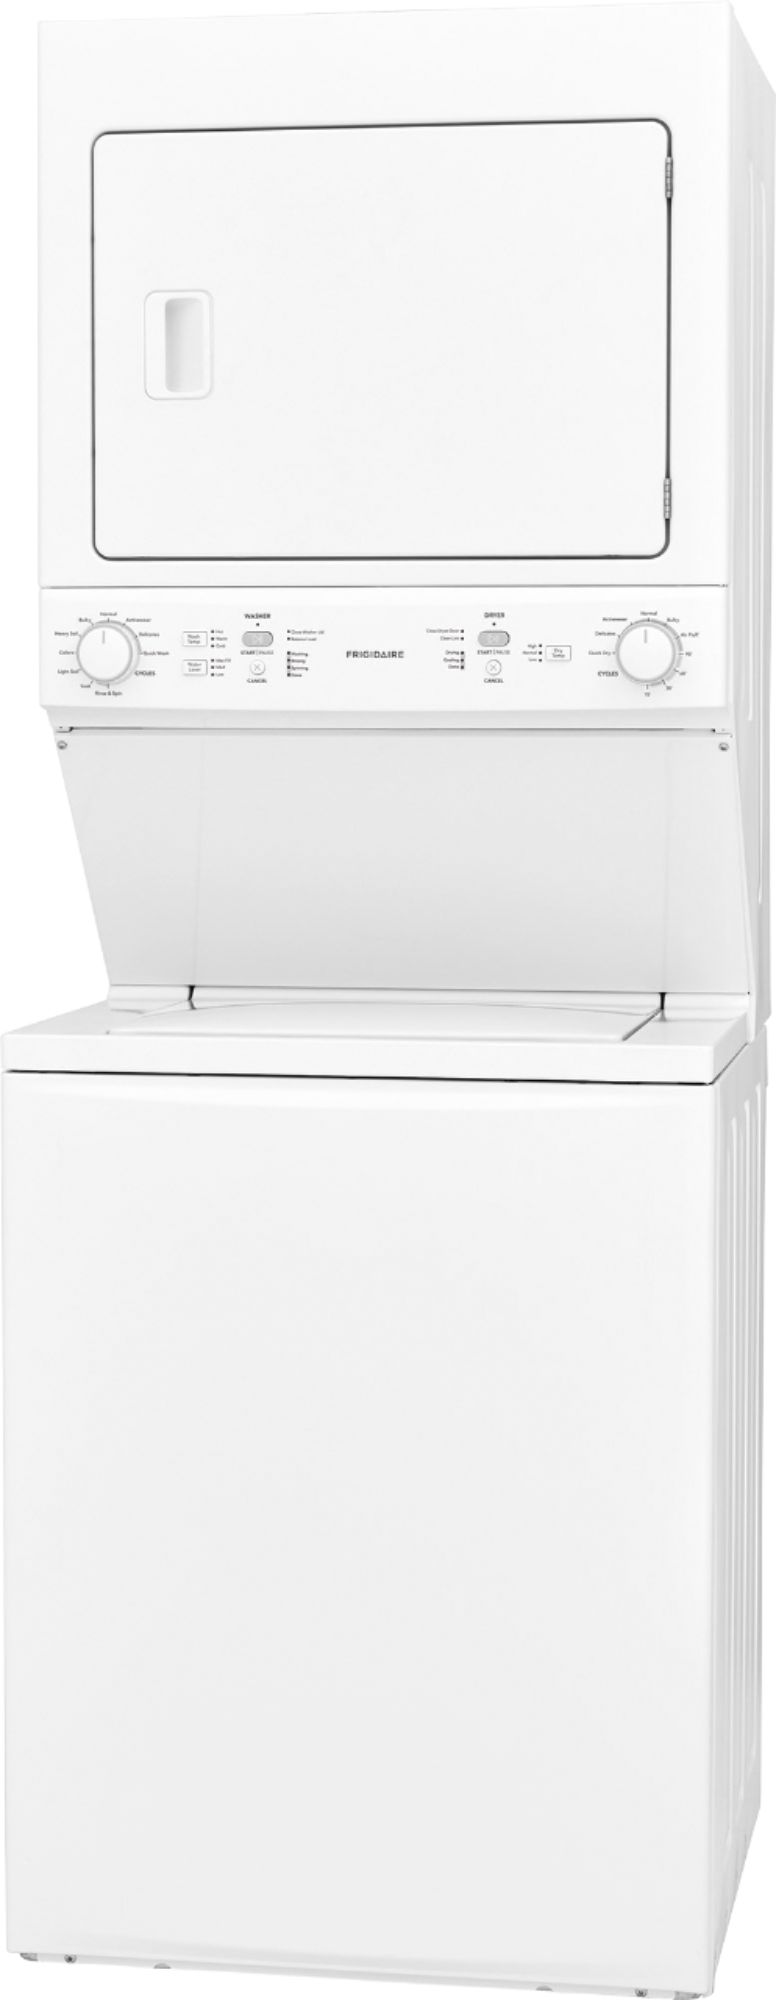 Left View: Frigidaire - 3.9 Cu. Ft. Top Load Washer and 5.5 Cu. Ft. Electric Dryer Laundry Center - White